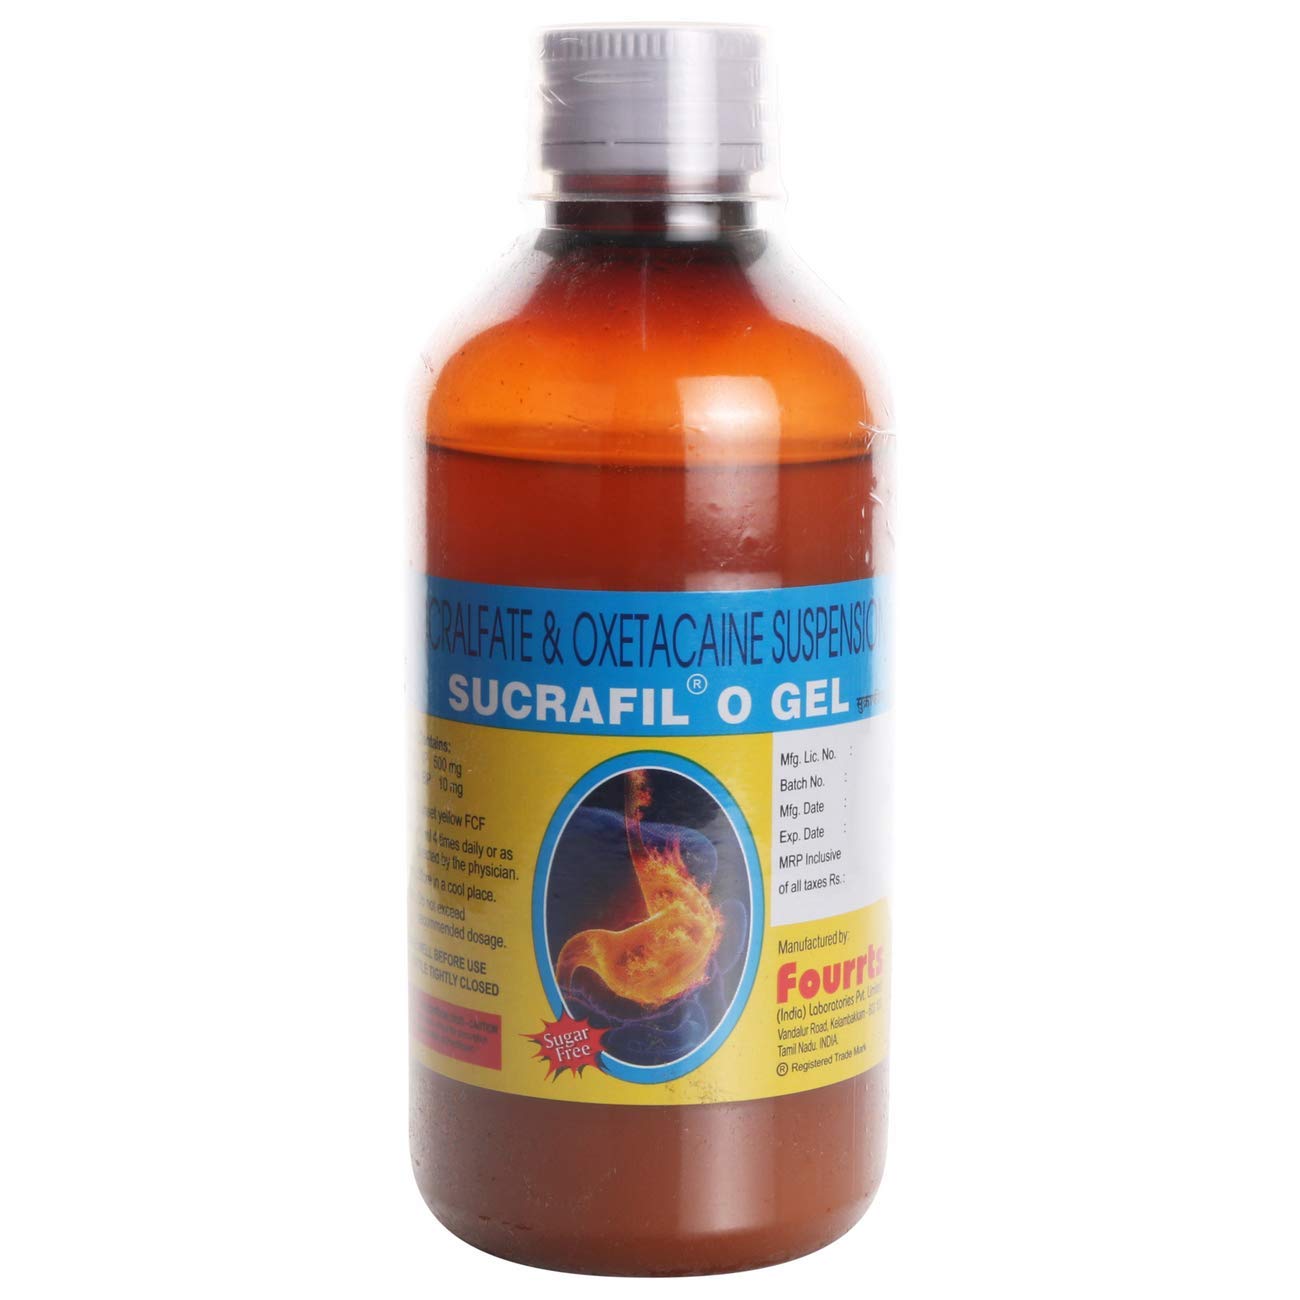 Shop Sucrafil O Gel Syrup 200ml - Sucralfate & Oxetacaine Suspension at price 229.00 from Fourrts Online - Ayush Care